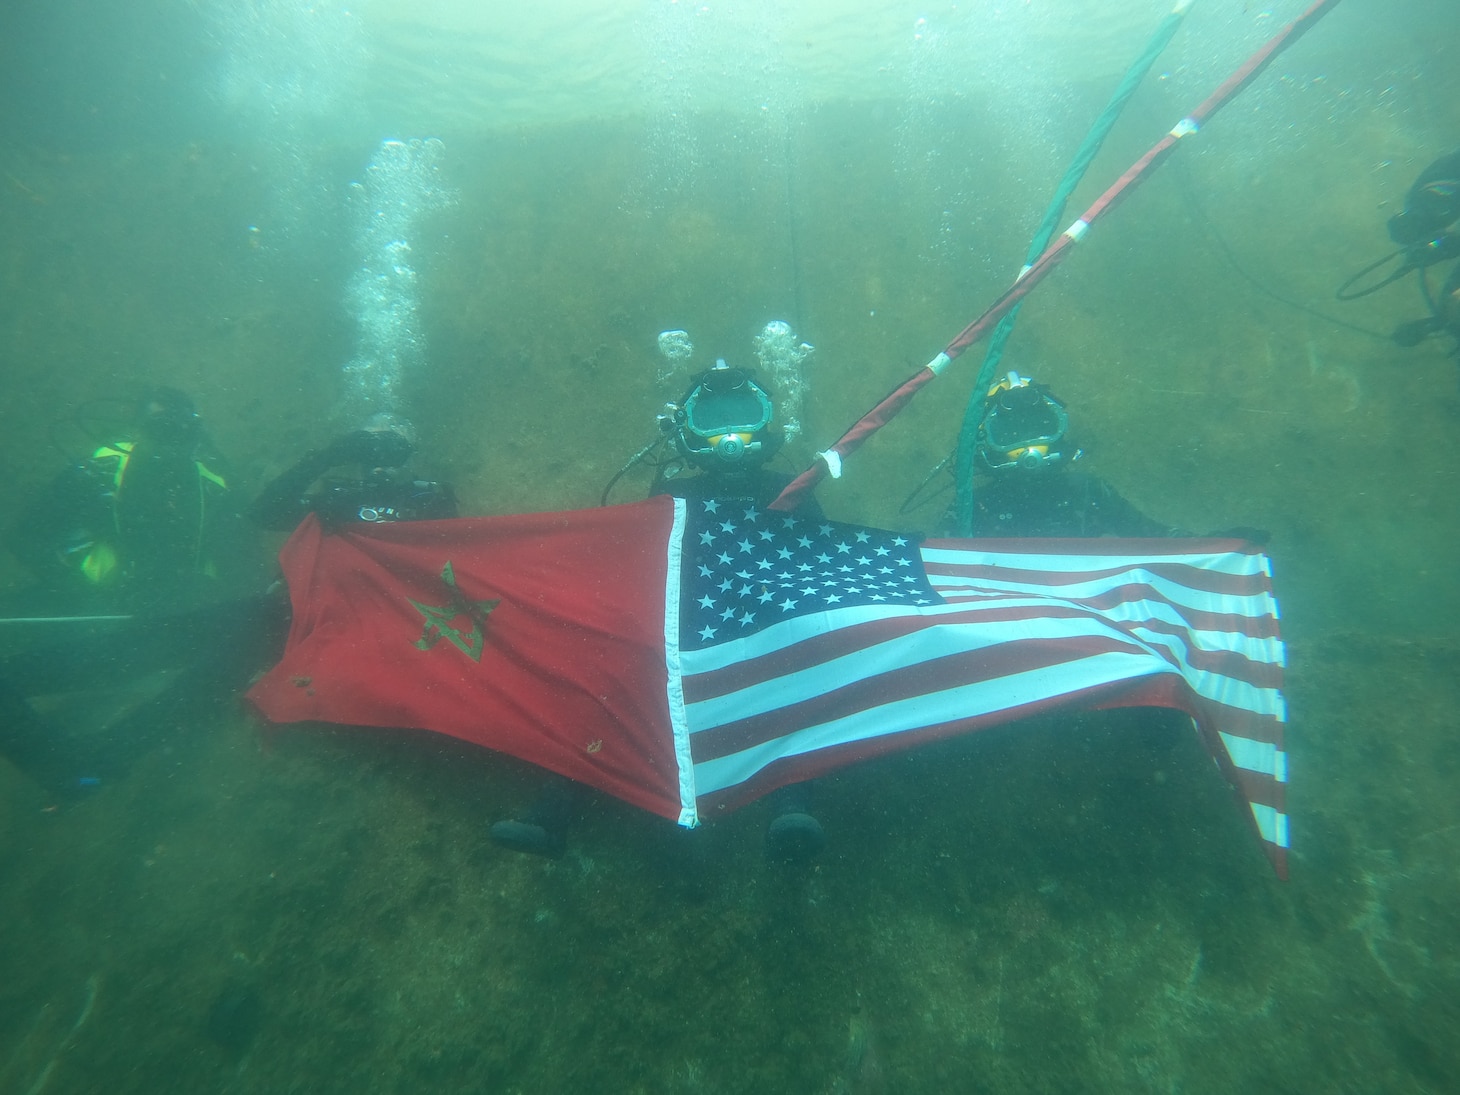 Navy divers from the Royal Moroccan Navy and the U.S. Navy’s Underwater Construction Team 1 present their national colors underwater during bilateral diving operations in Ksar Sghir, Morocco, Nov. 23, 2022.